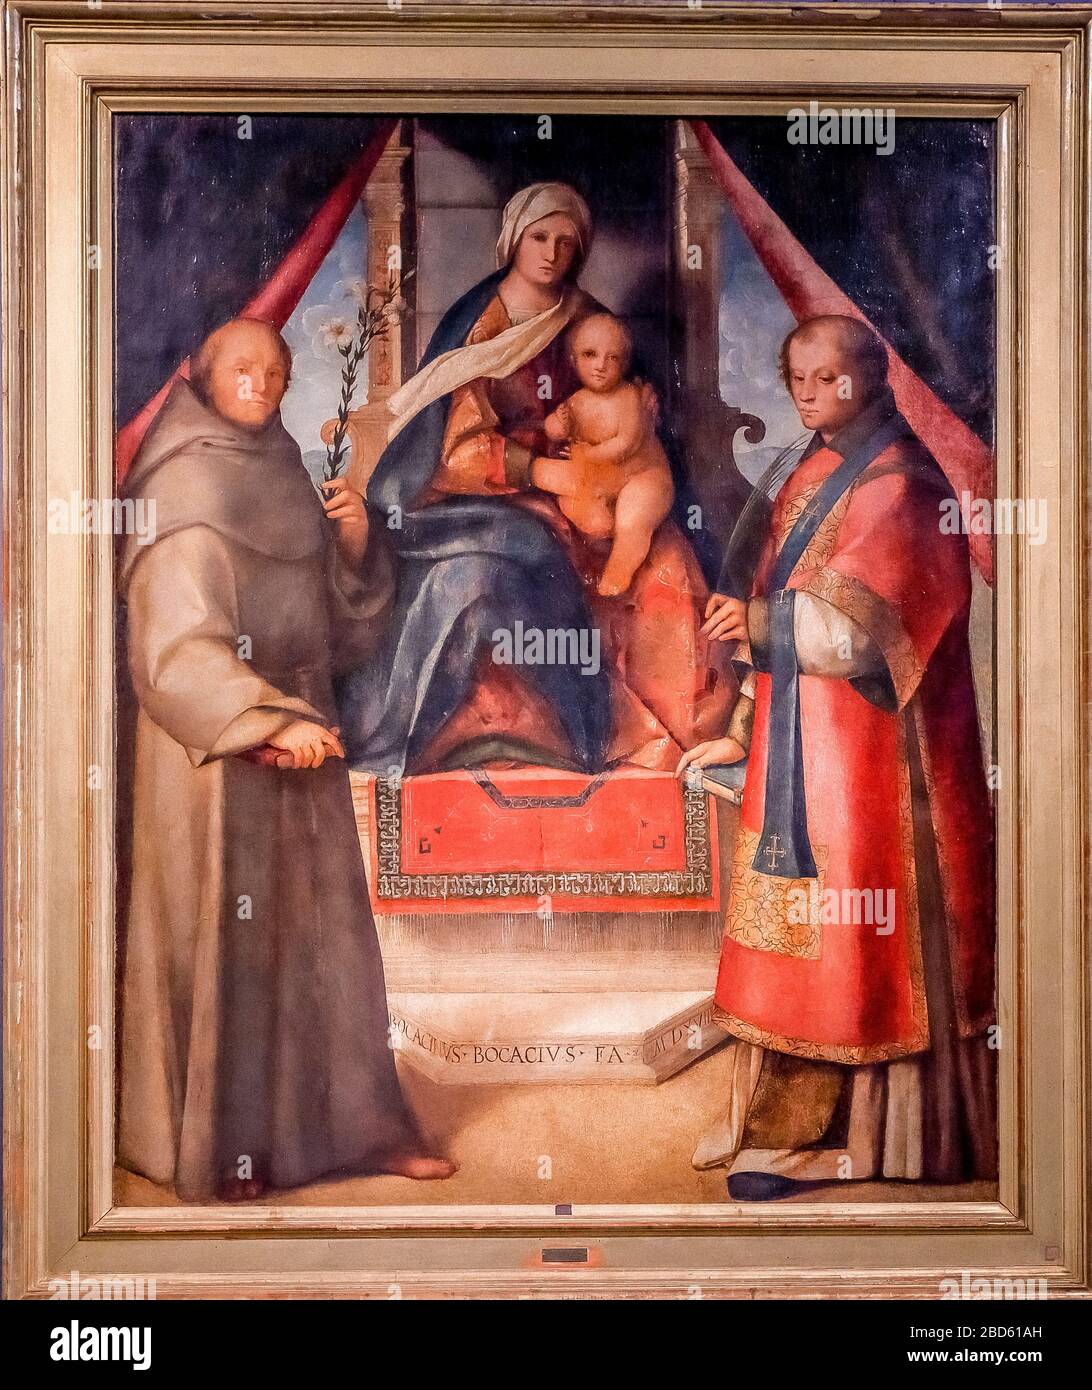 Italy Lombardy - Cremona - Civic Museum -' Ala Ponzone' - Boccaccino Boccaccio: Madonna Enthroned between St. Vincent and St. Anthony Stock Photo